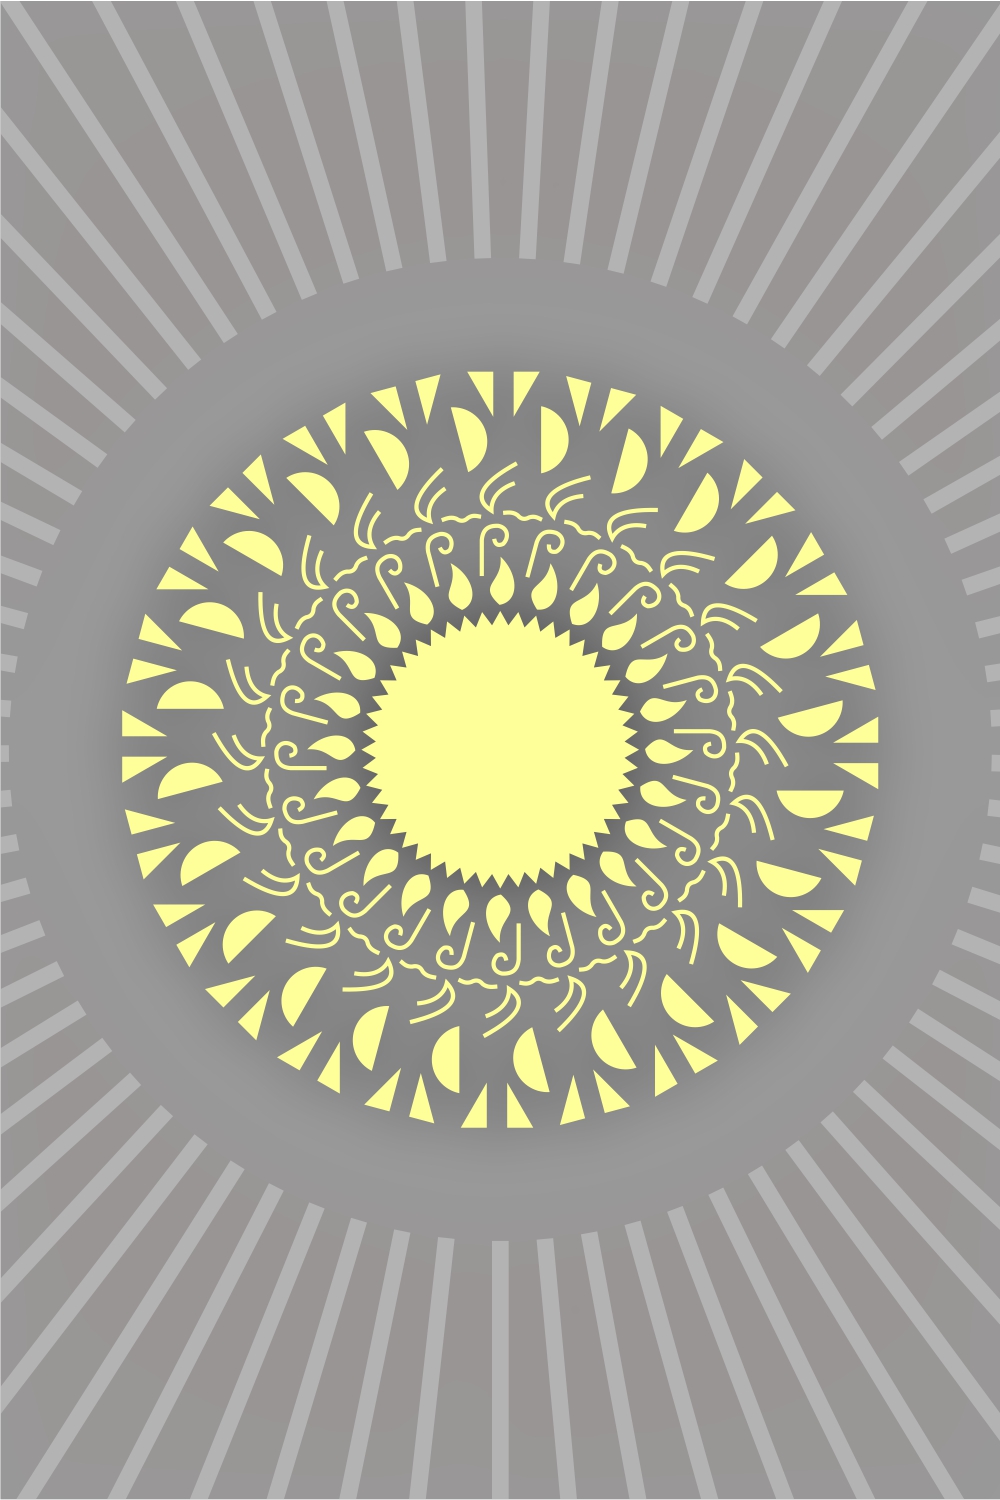 Modern Mandala Design Files DXF PNG For Print On Demand Projects DXF PNG SVG JPG pinterest preview image.